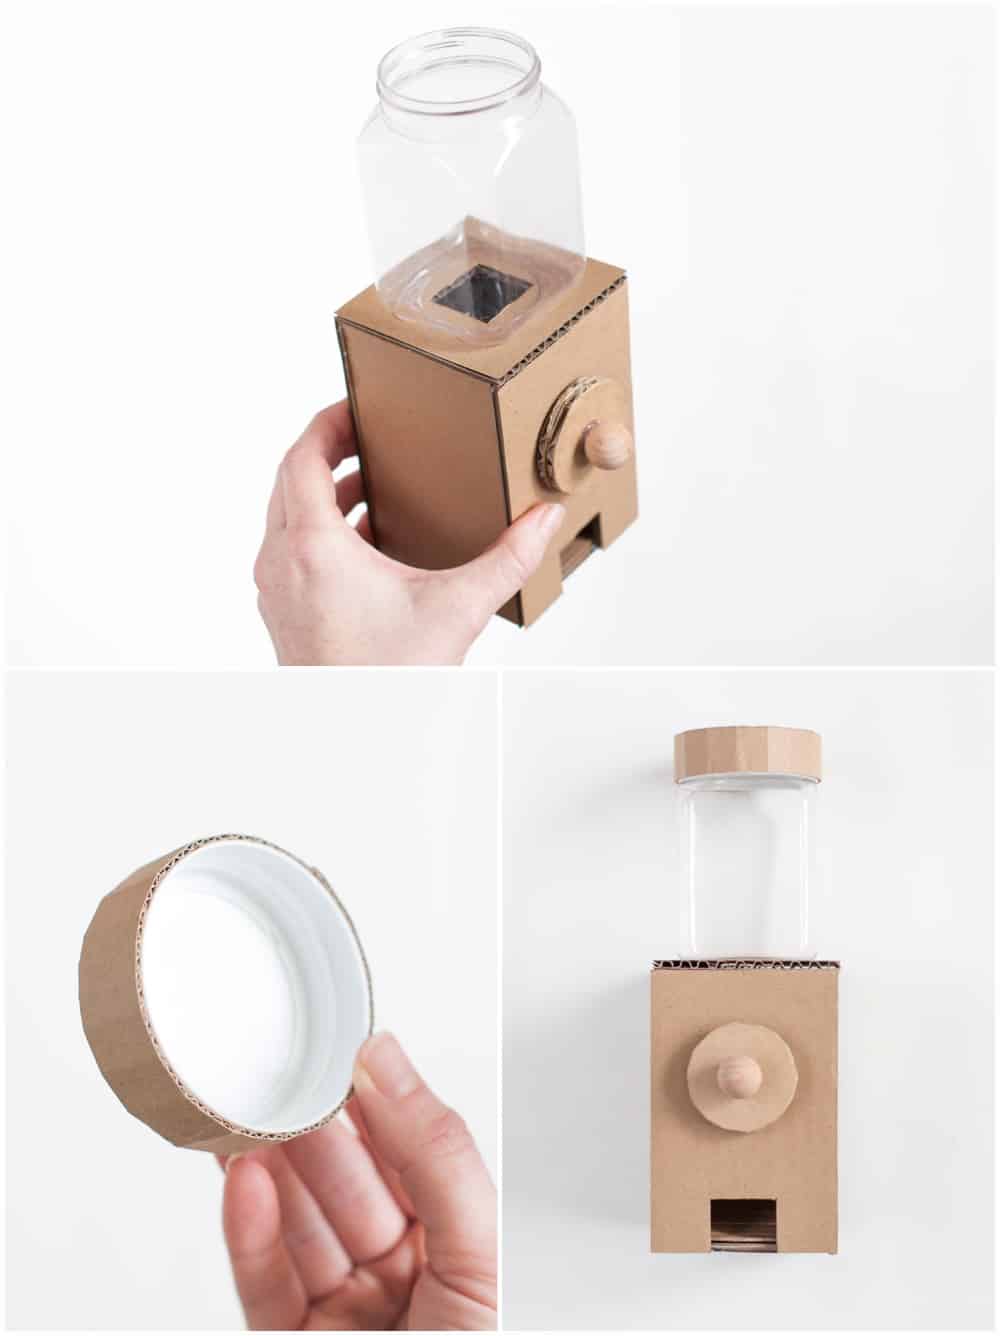 step by step process to make a cardboard gumball machine